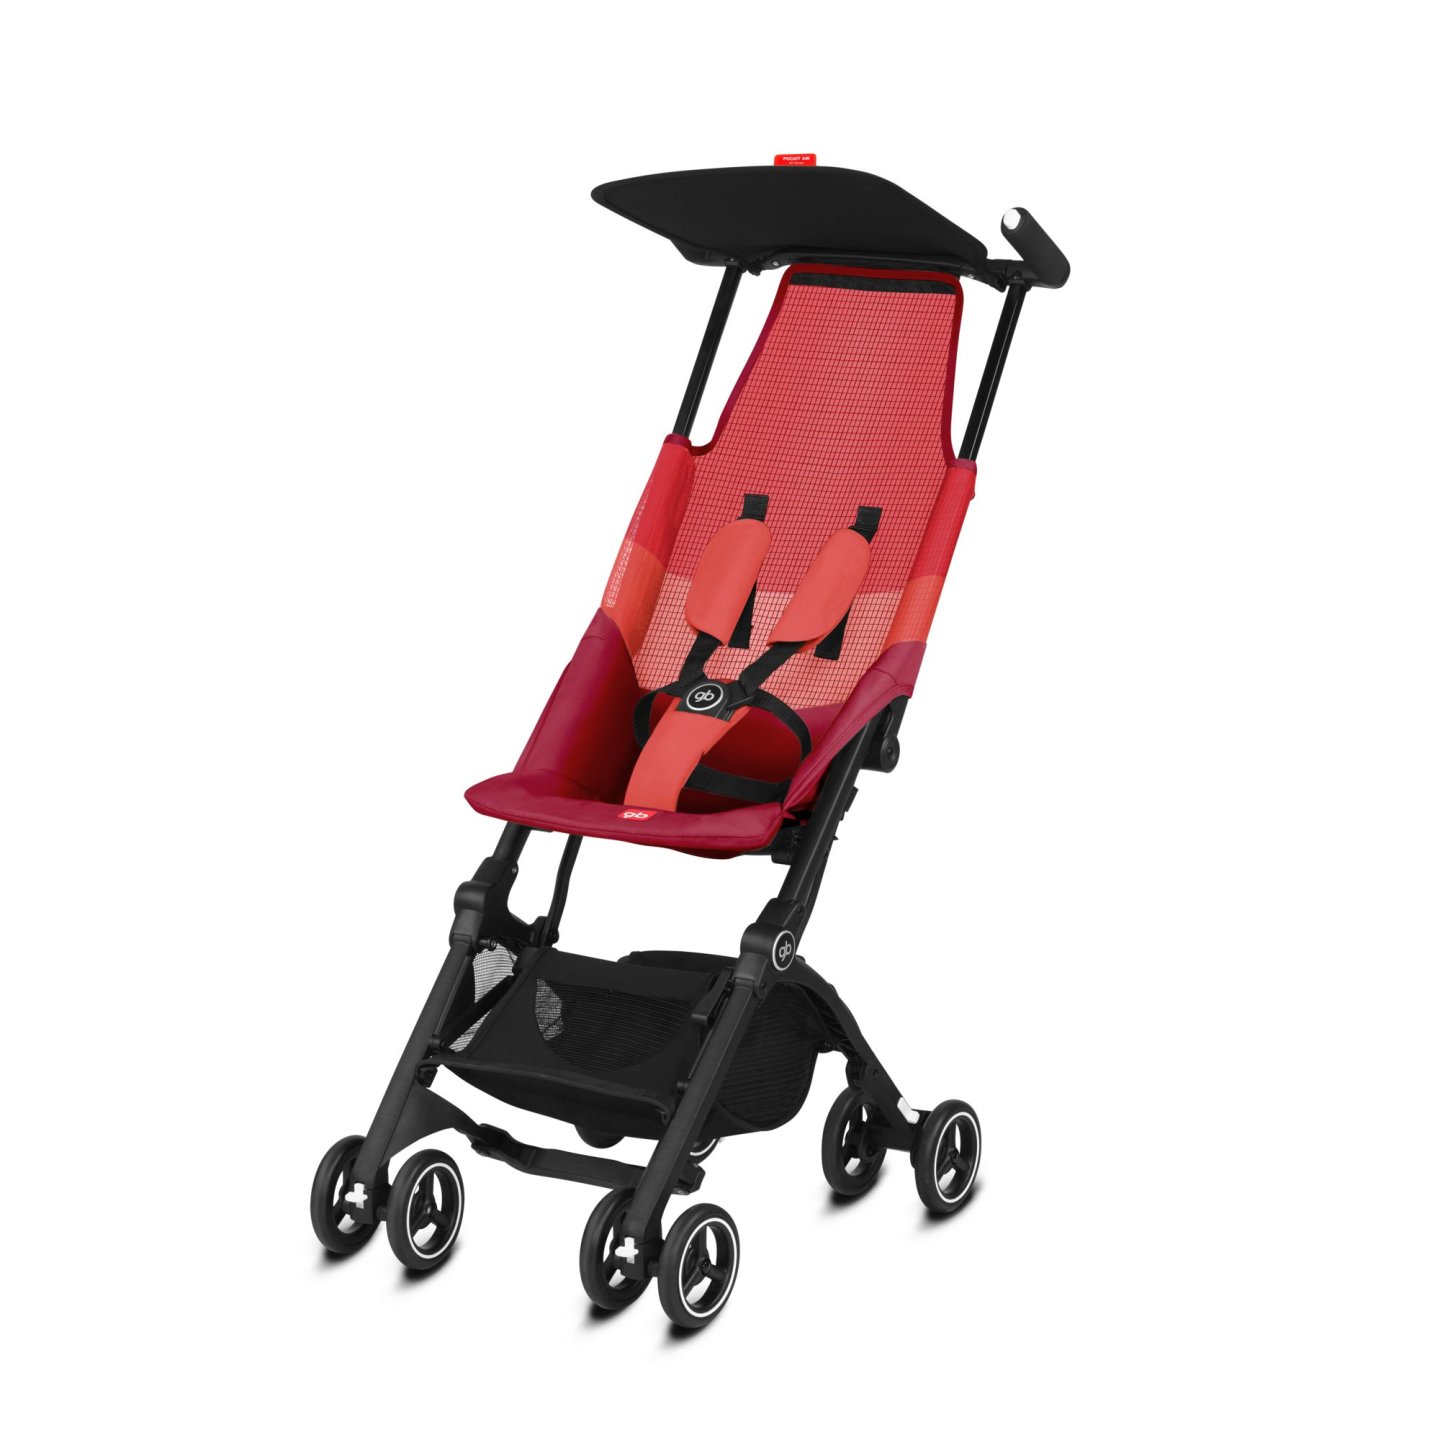 //images.gb-online.com/q_85,dn_72,h_1440/gbo/product-Pockit-Air-All-Terrain-Rose-Red-Sun-Shade-8624-8617-8589_ec4db7